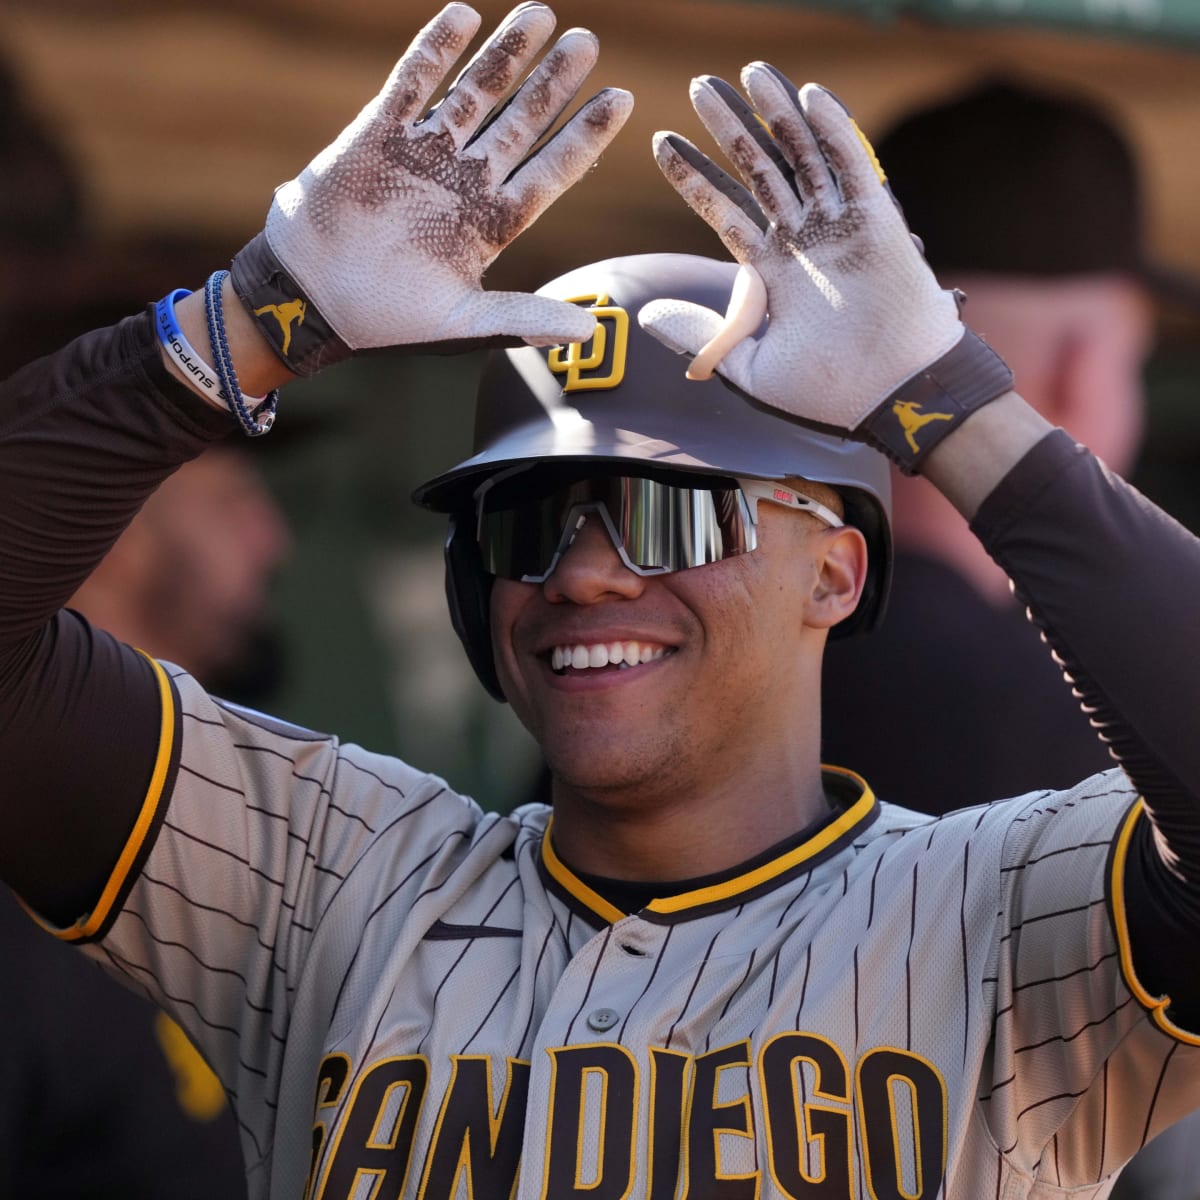 Padres News: Juan Soto Reveals He's Felt Early Effects of Pitch Clock  During Struggles - Sports Illustrated Inside The Padres News, Analysis and  More